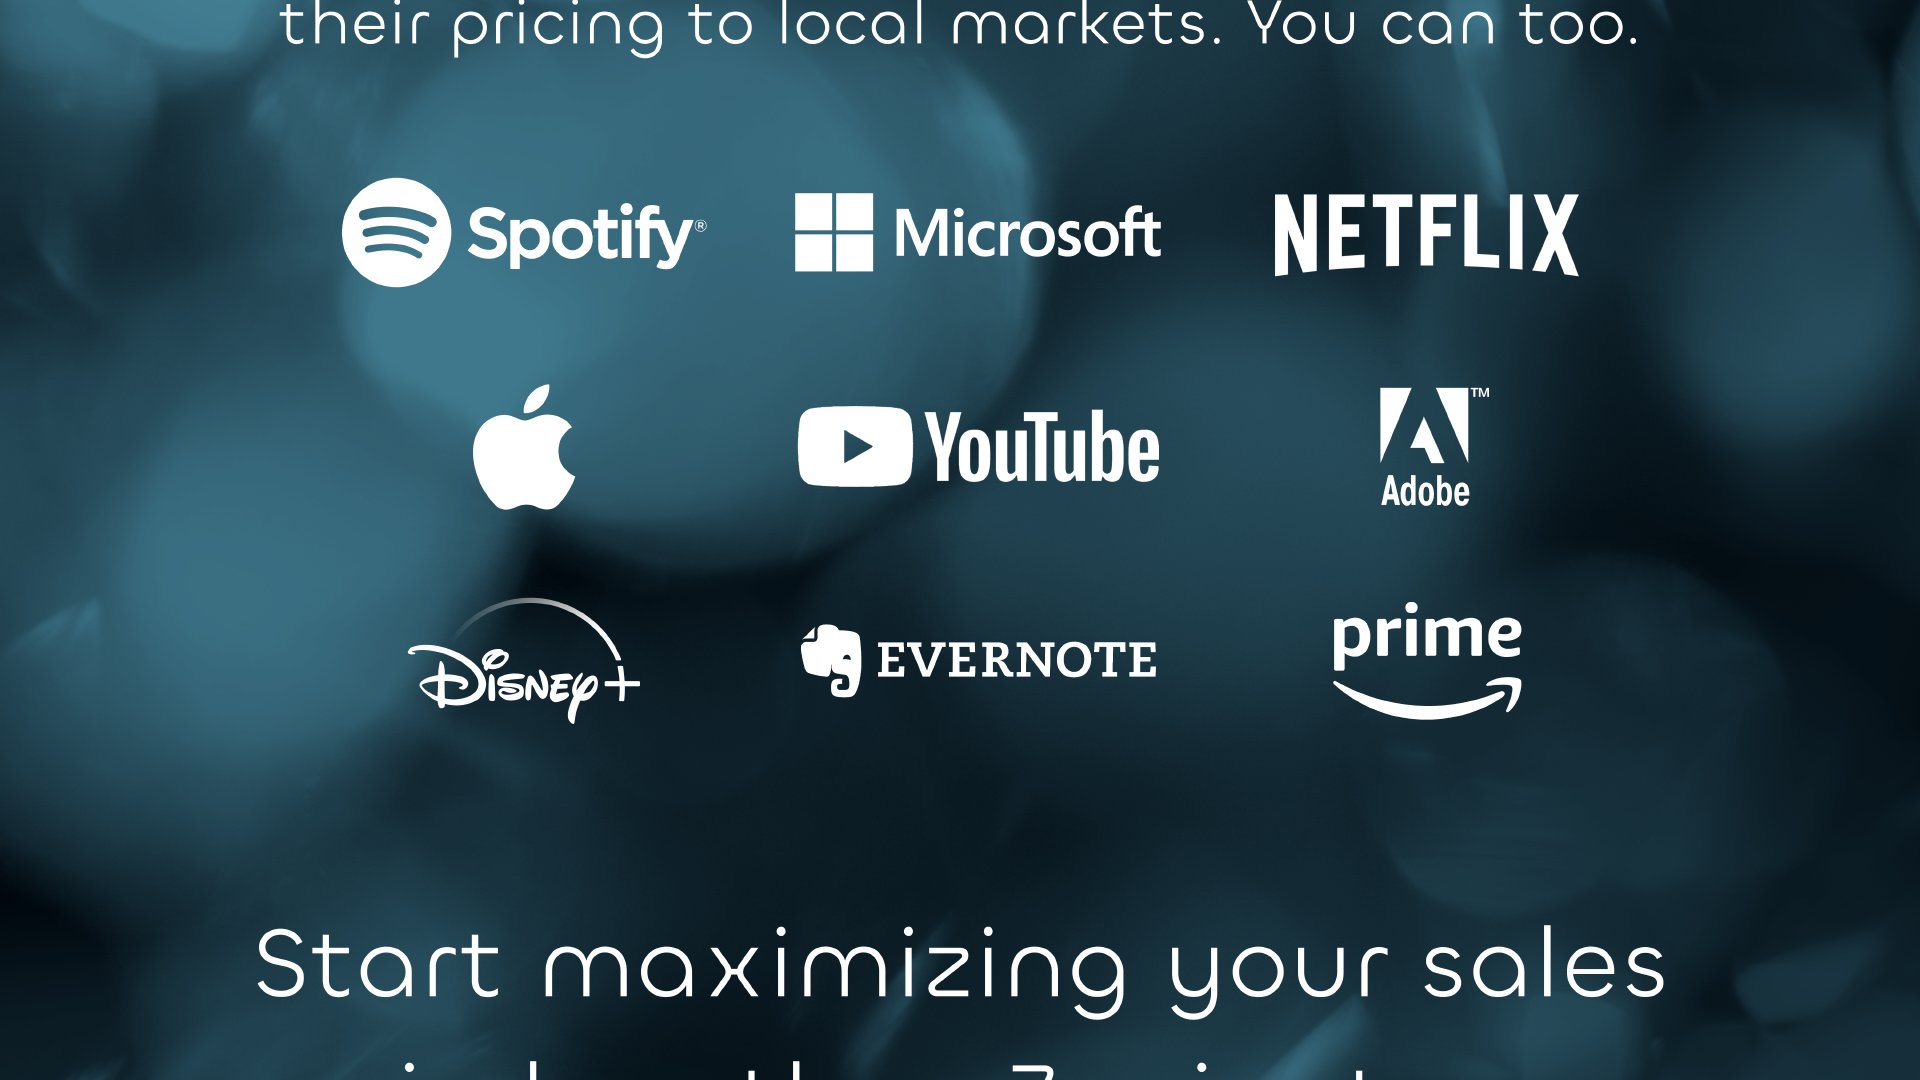 Various logos of companies in a collage style that adapt their pricing to local markets. Logos include: Spotify, Microsoft, Netflix, Apple, YouTube, Amazon Prime, and Disney+.